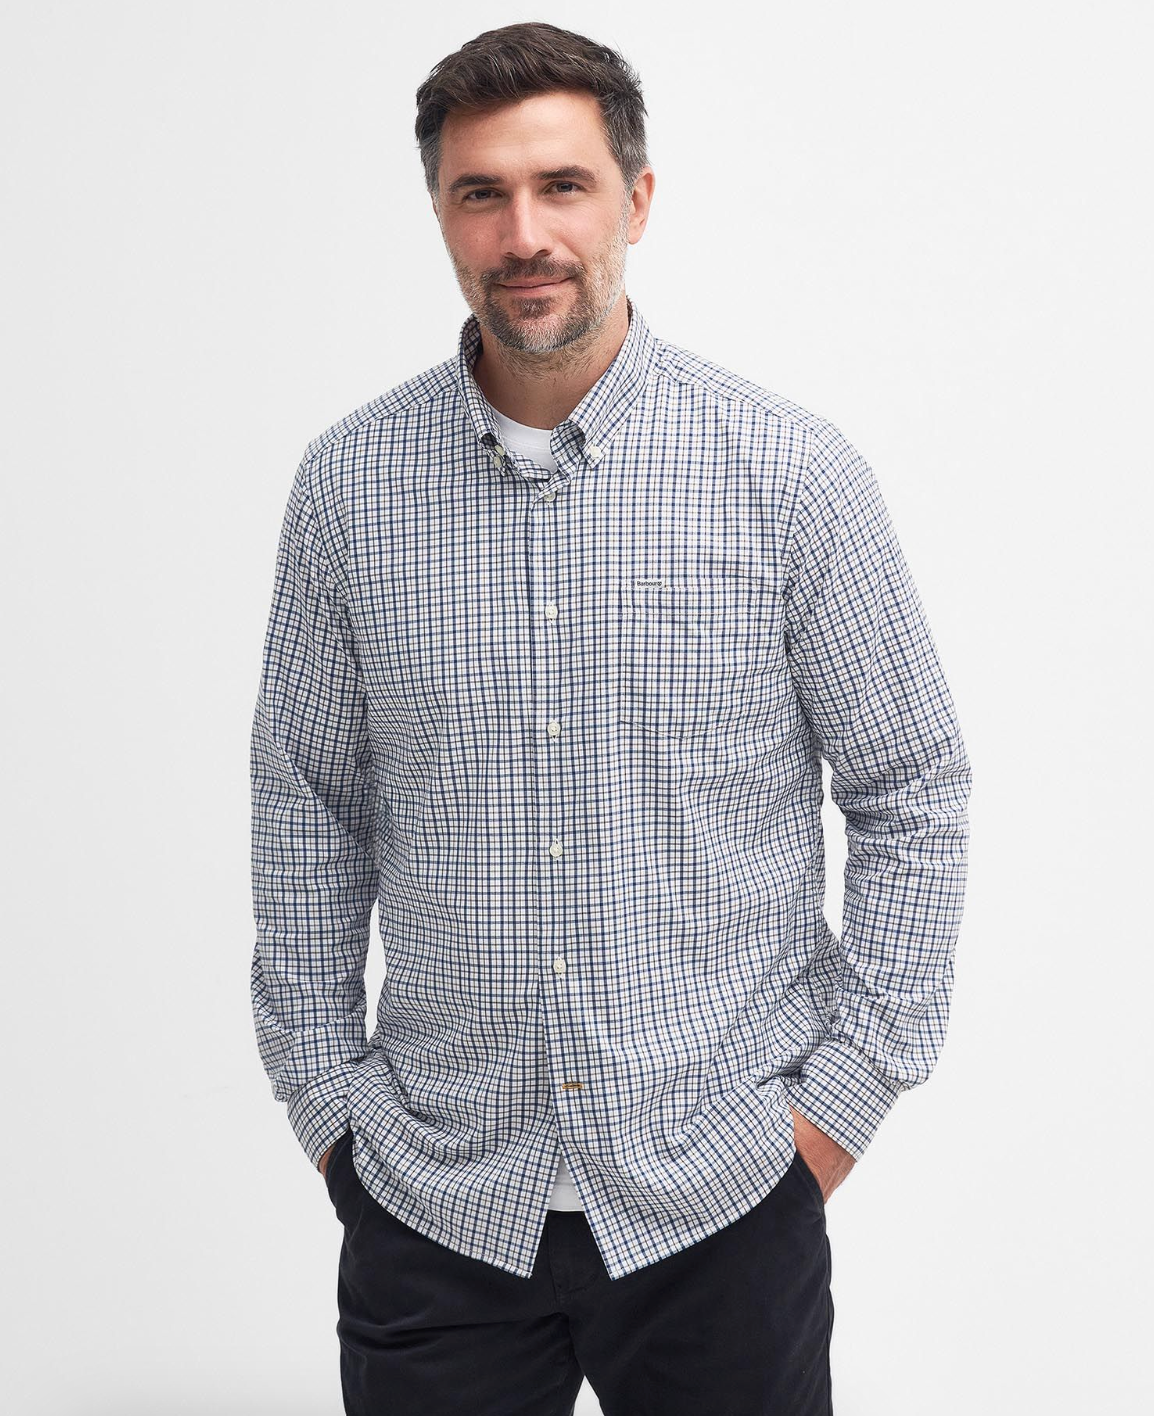 Teesdale Tailored Fit Perf Shirt Navy